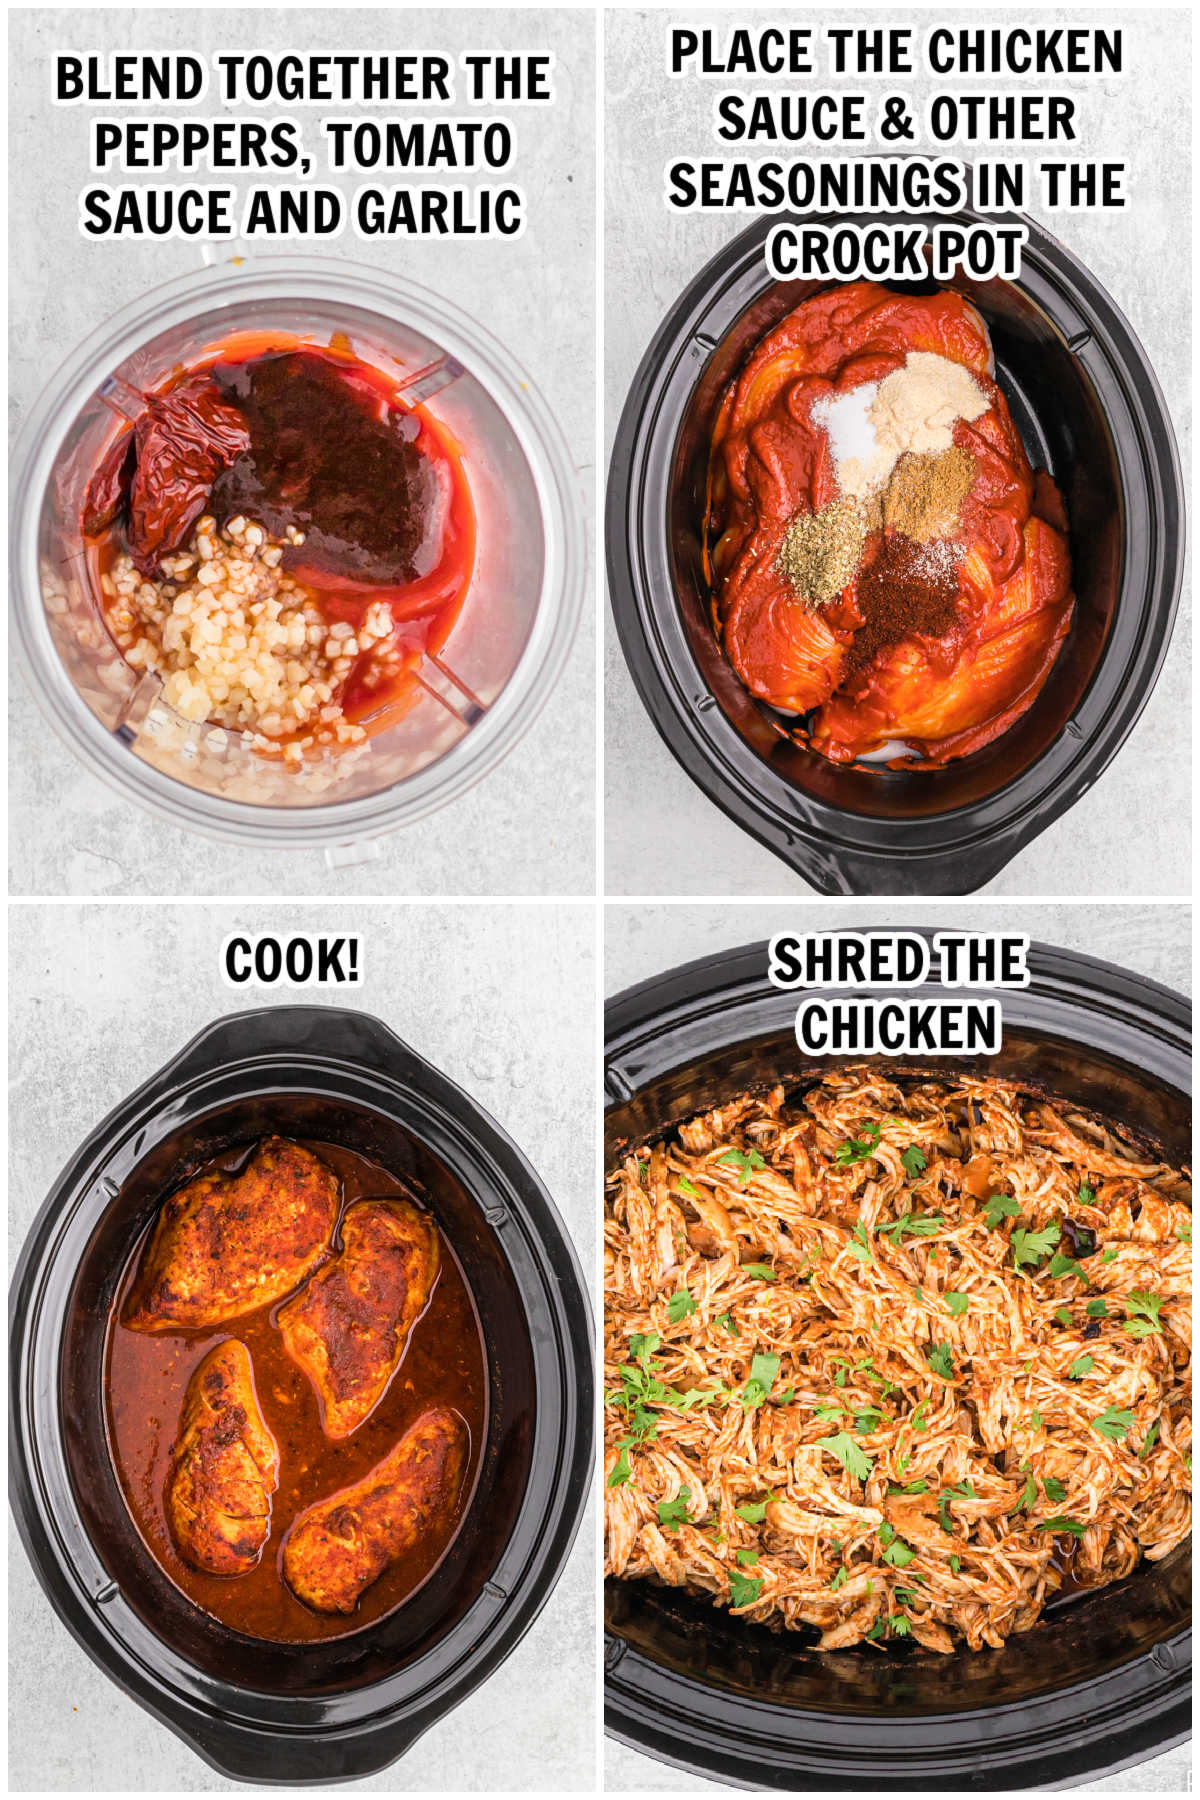 The process of making chipotle chicken